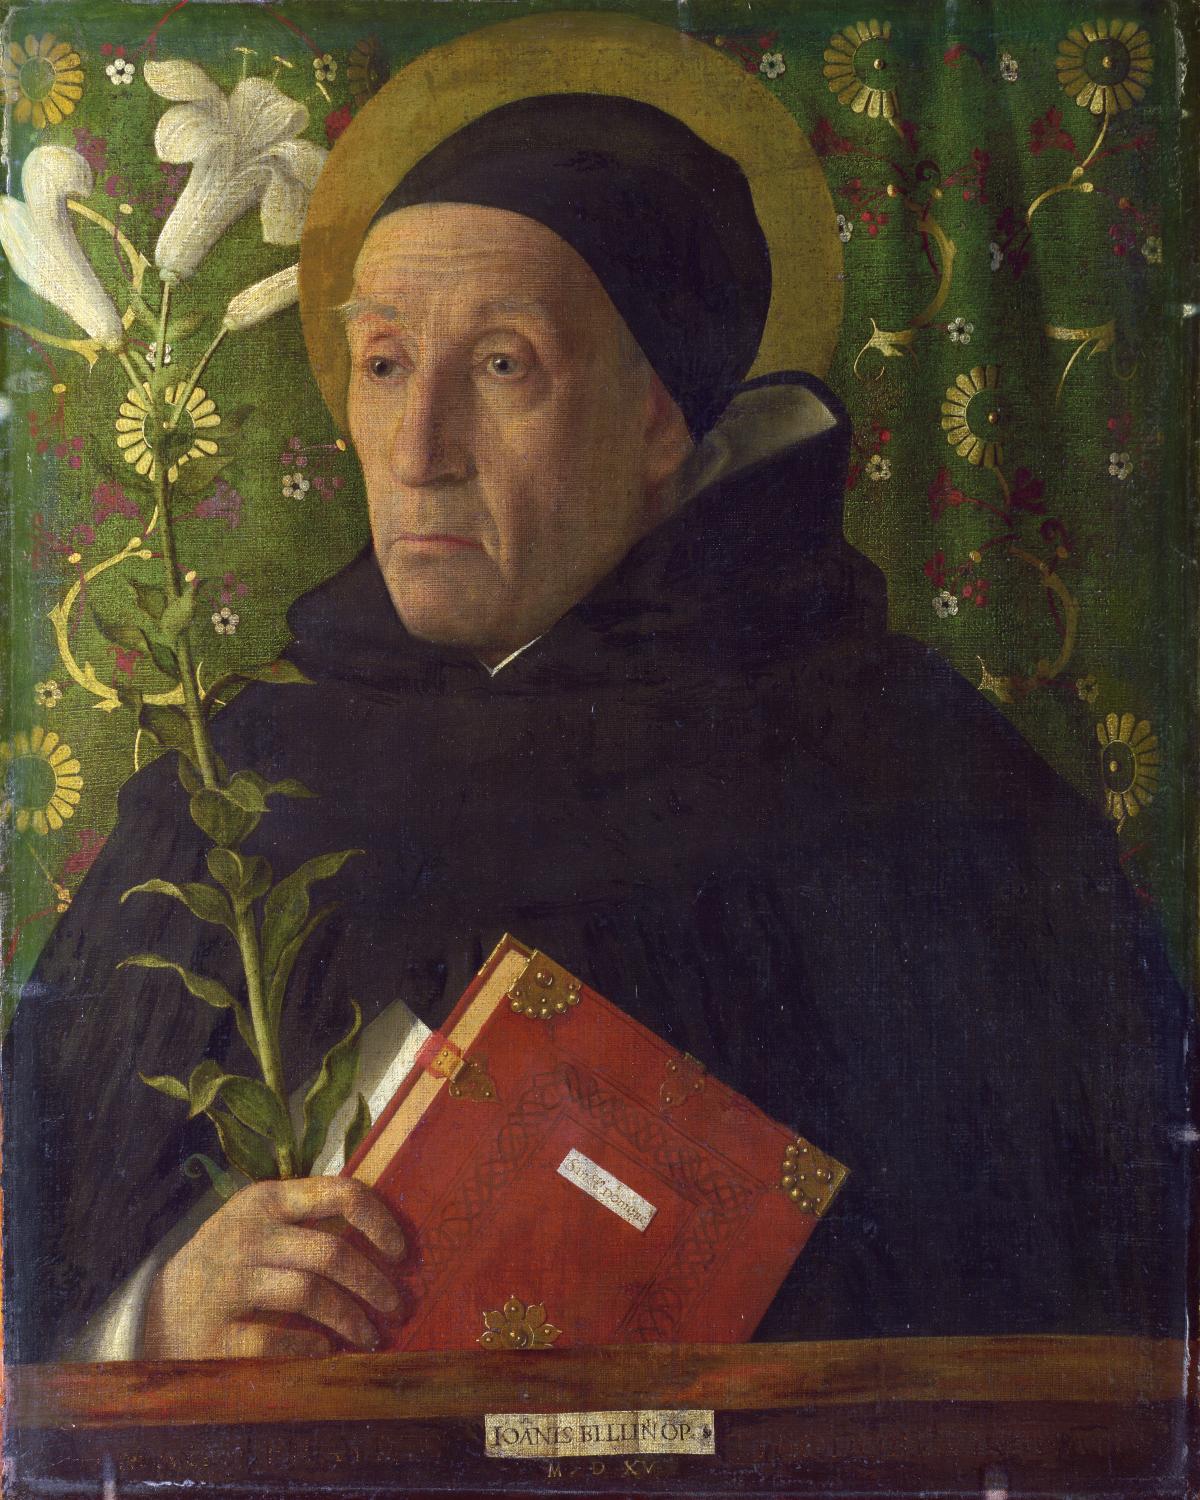 Saint in a black monk's habit and cap, holding a red leather Bible and a long stemmed white flower